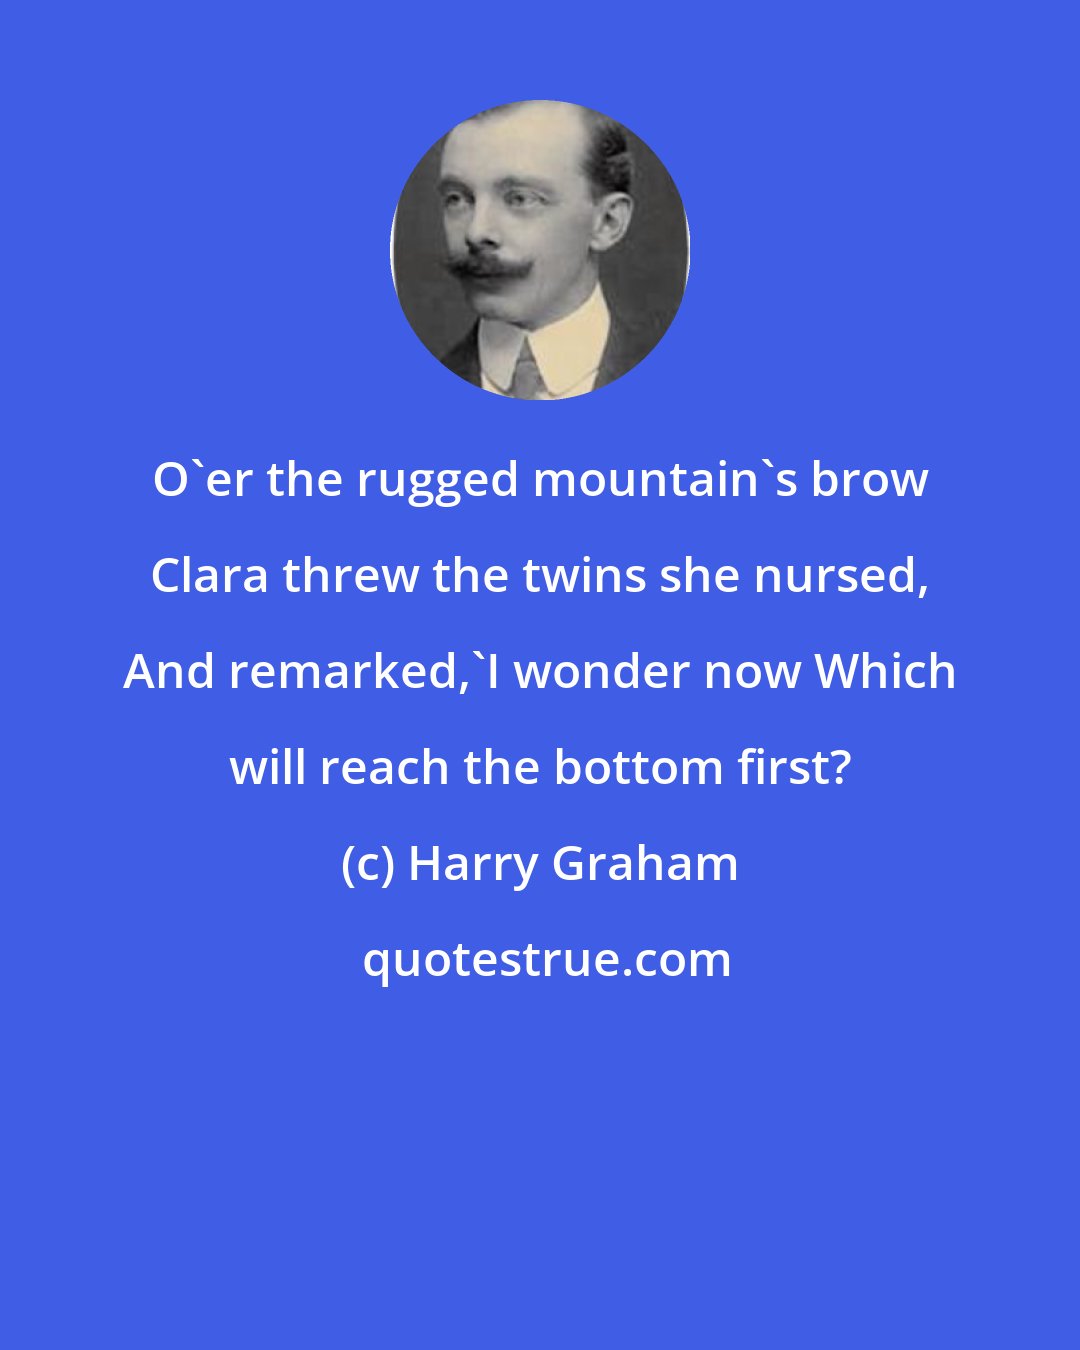 Harry Graham: O'er the rugged mountain's brow Clara threw the twins she nursed, And remarked,'I wonder now Which will reach the bottom first?